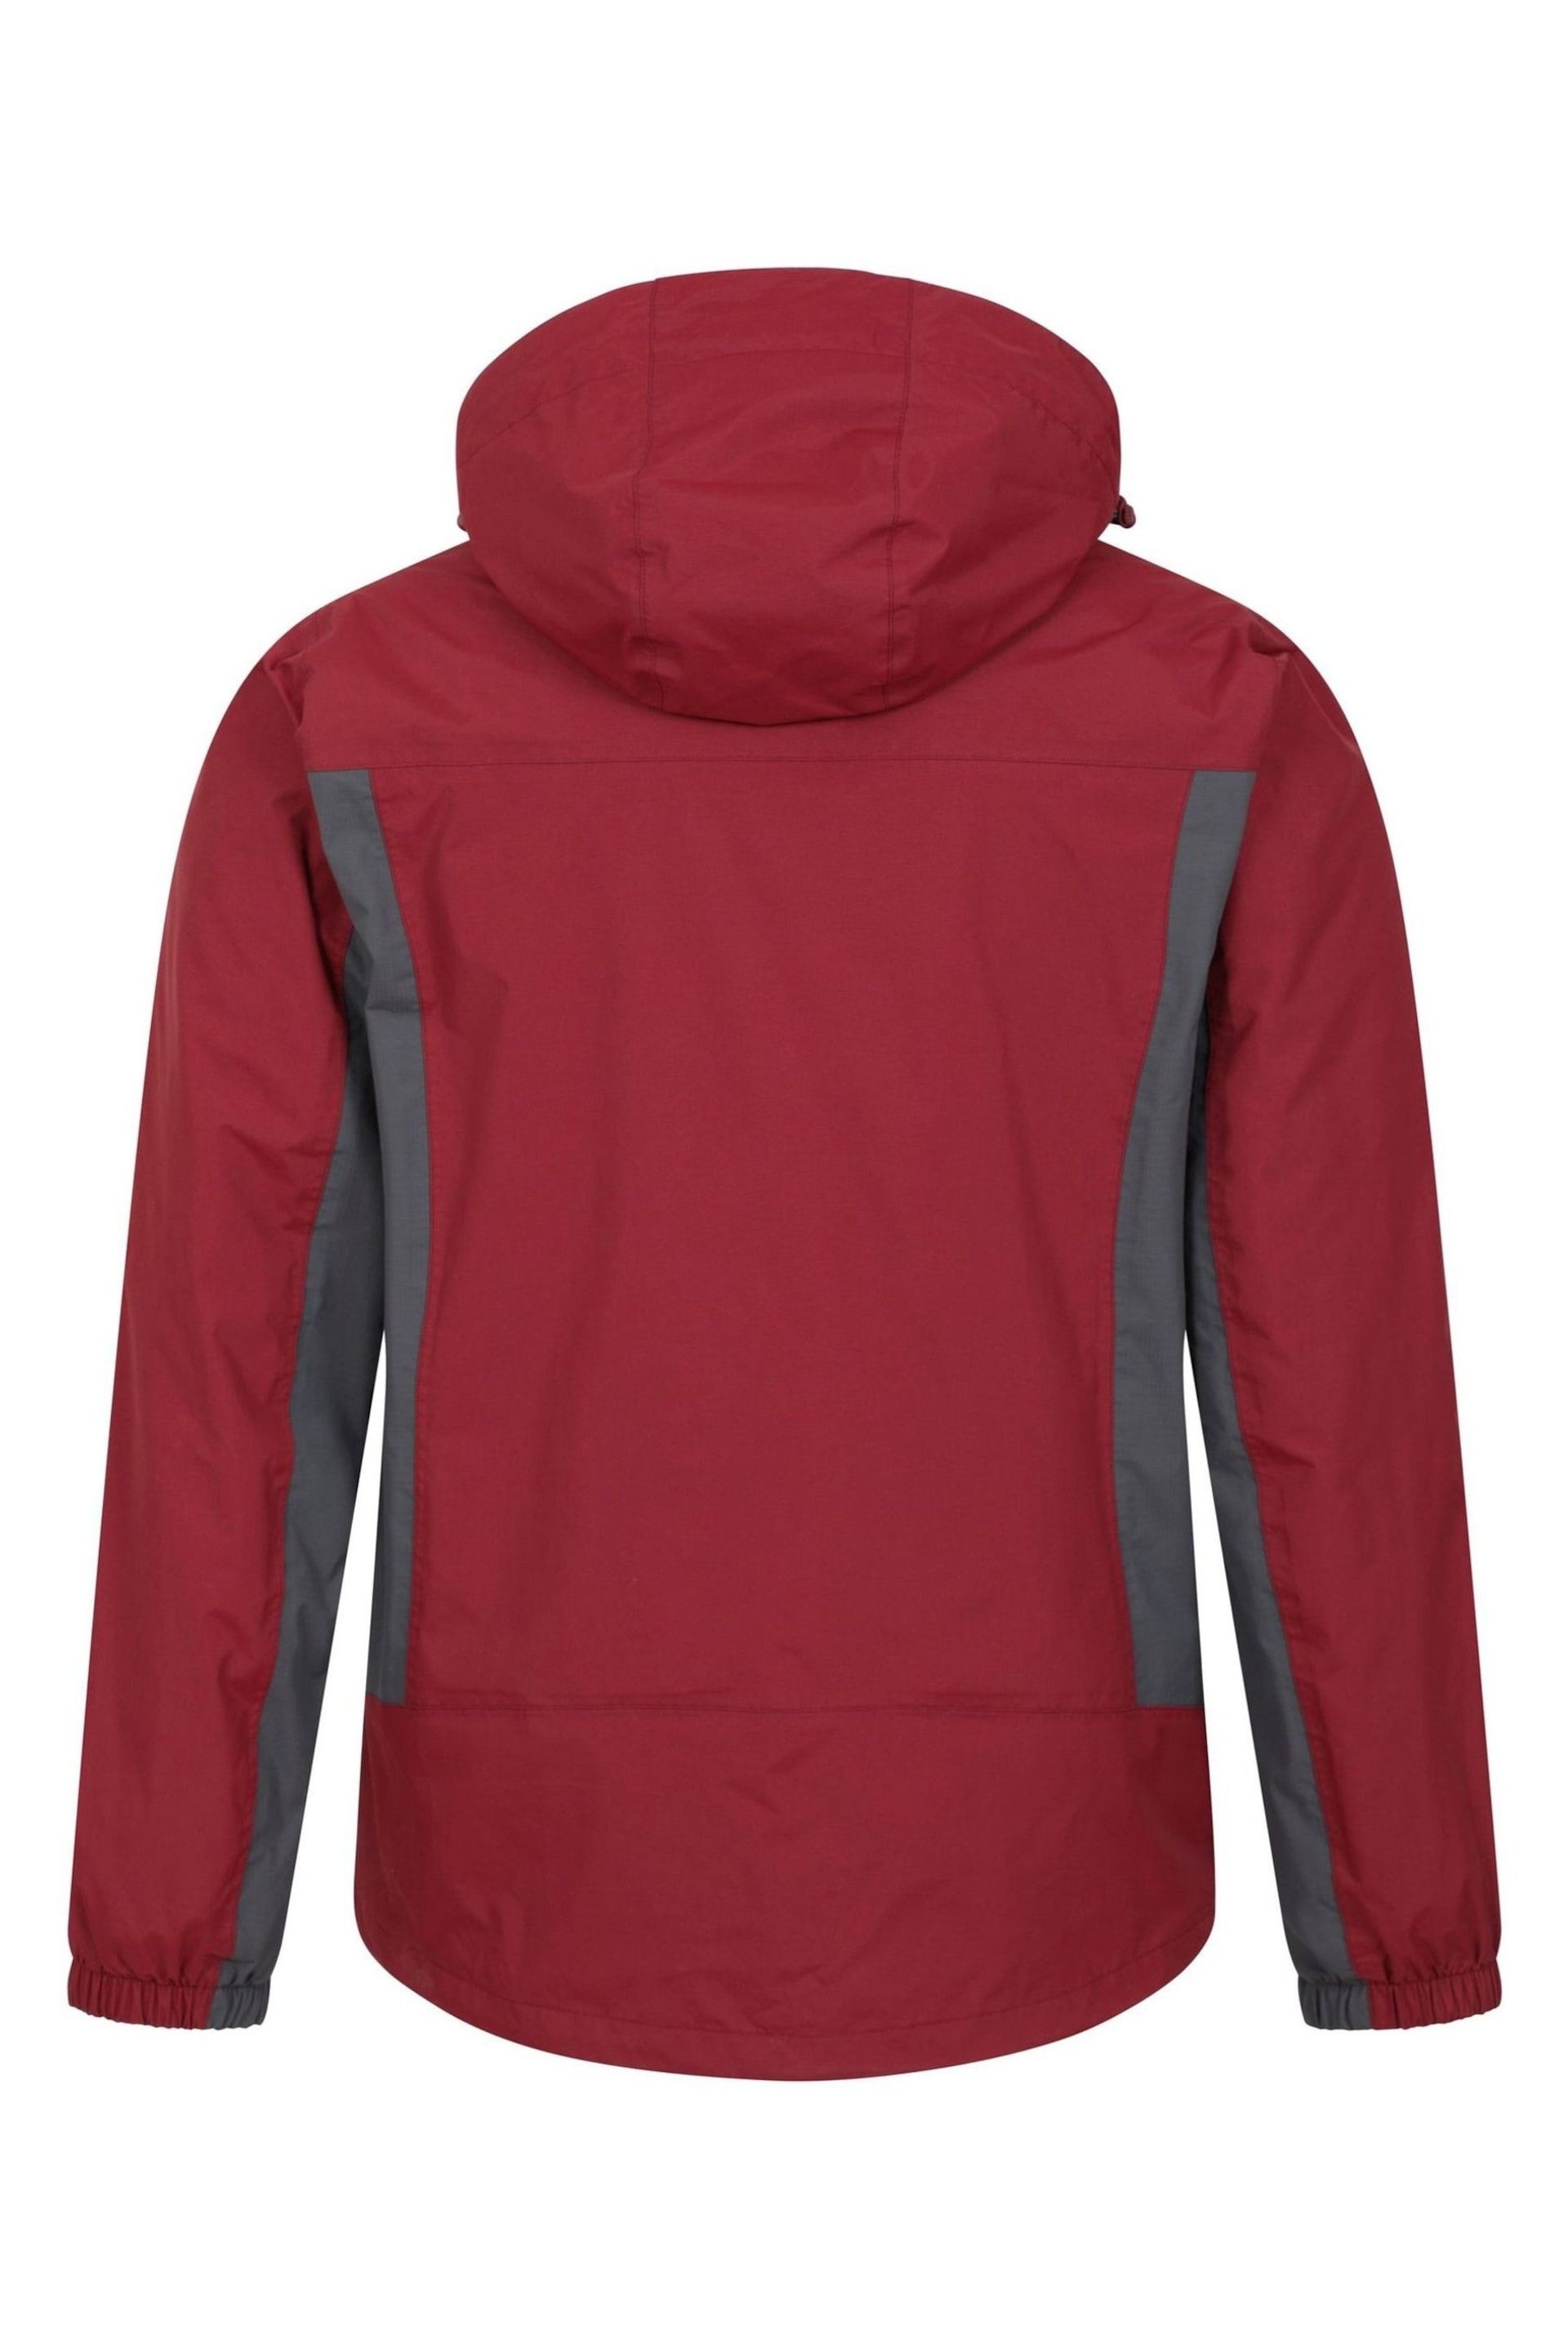 Mountain Warehouse Red Mens Thunderstorm Waterproof 3-In-1 Jacket - Image 4 of 5